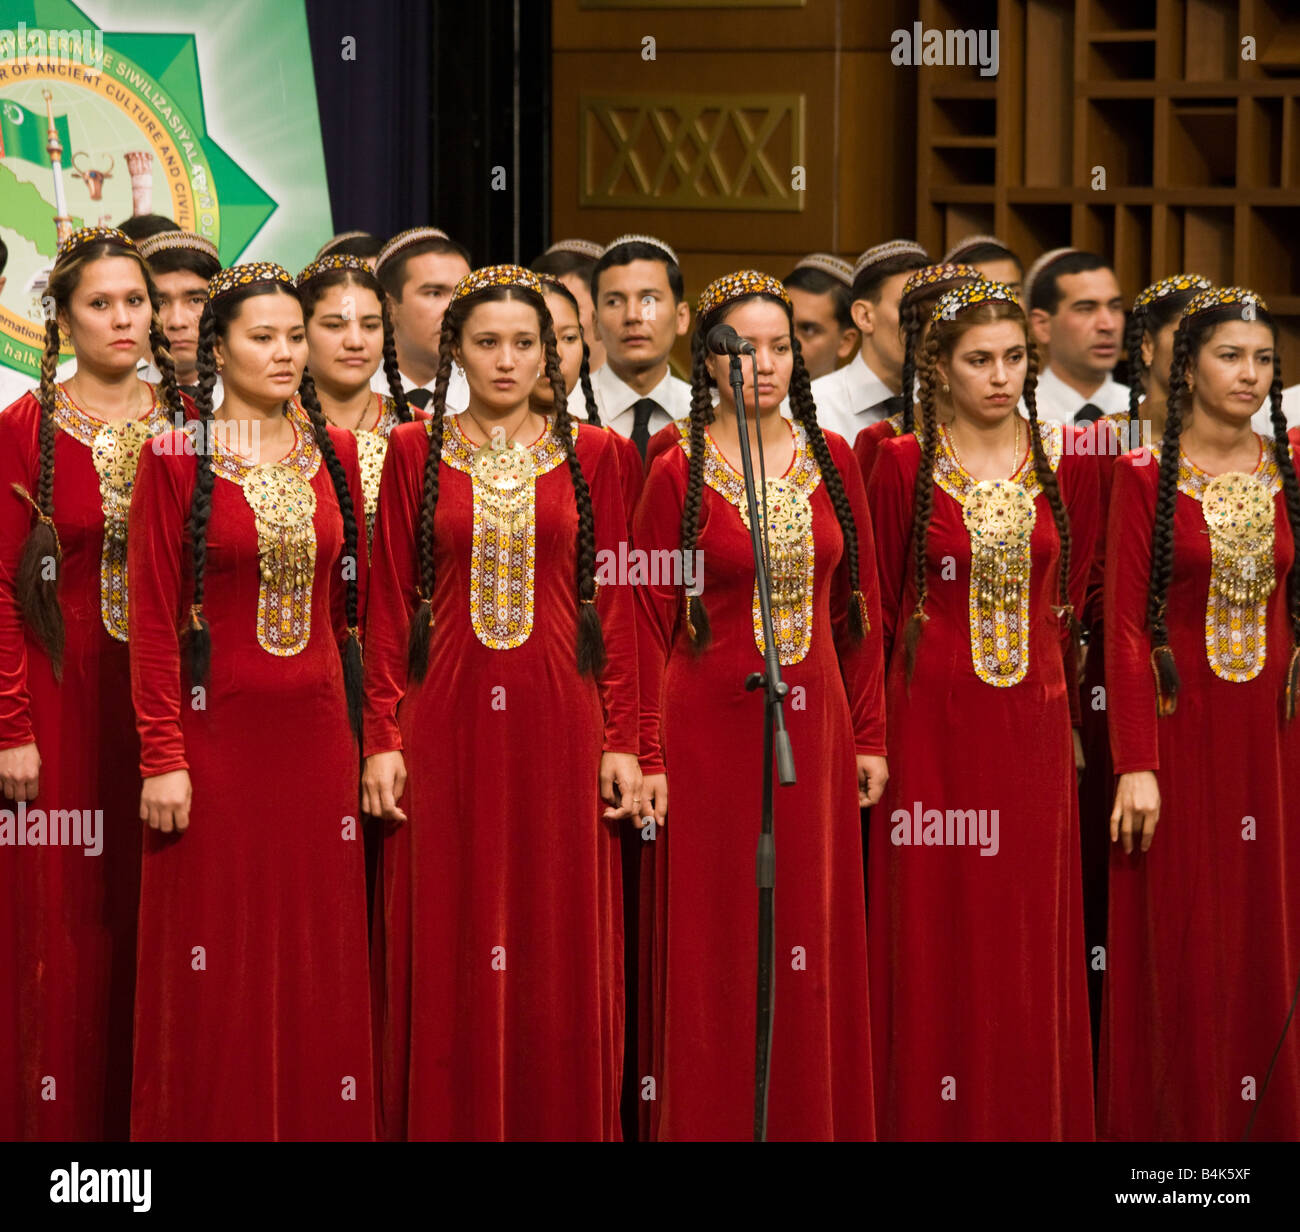 choir in native costume at opening of international conference, Ashqabat, Turkmenistan Stock Photo